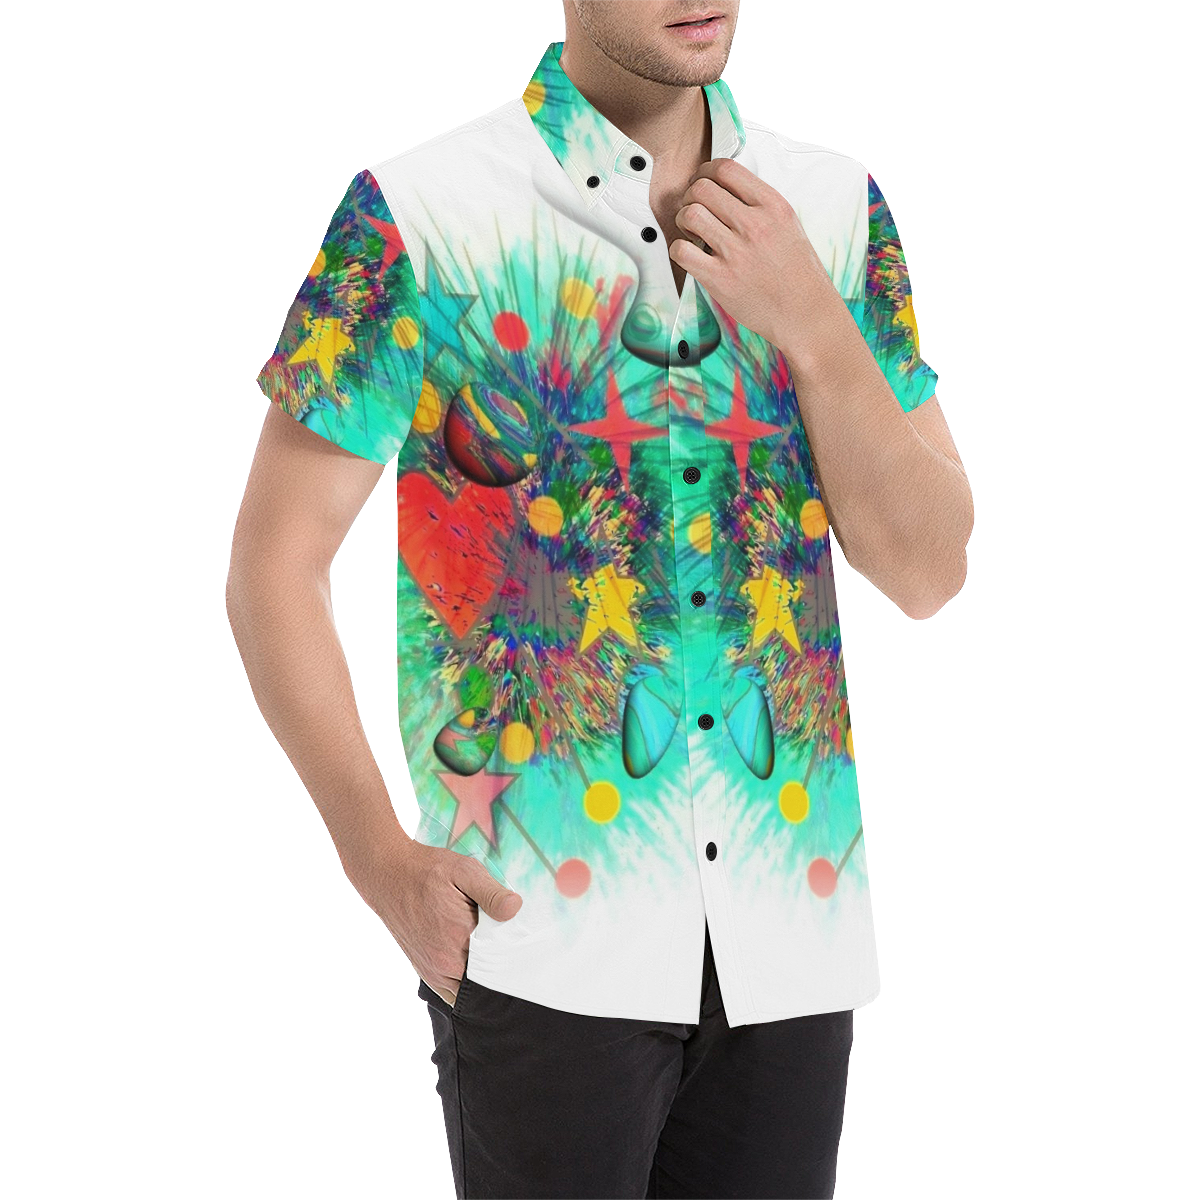 Drops Popart by Nico Bielow Men's All Over Print Short Sleeve Shirt (Model T53)